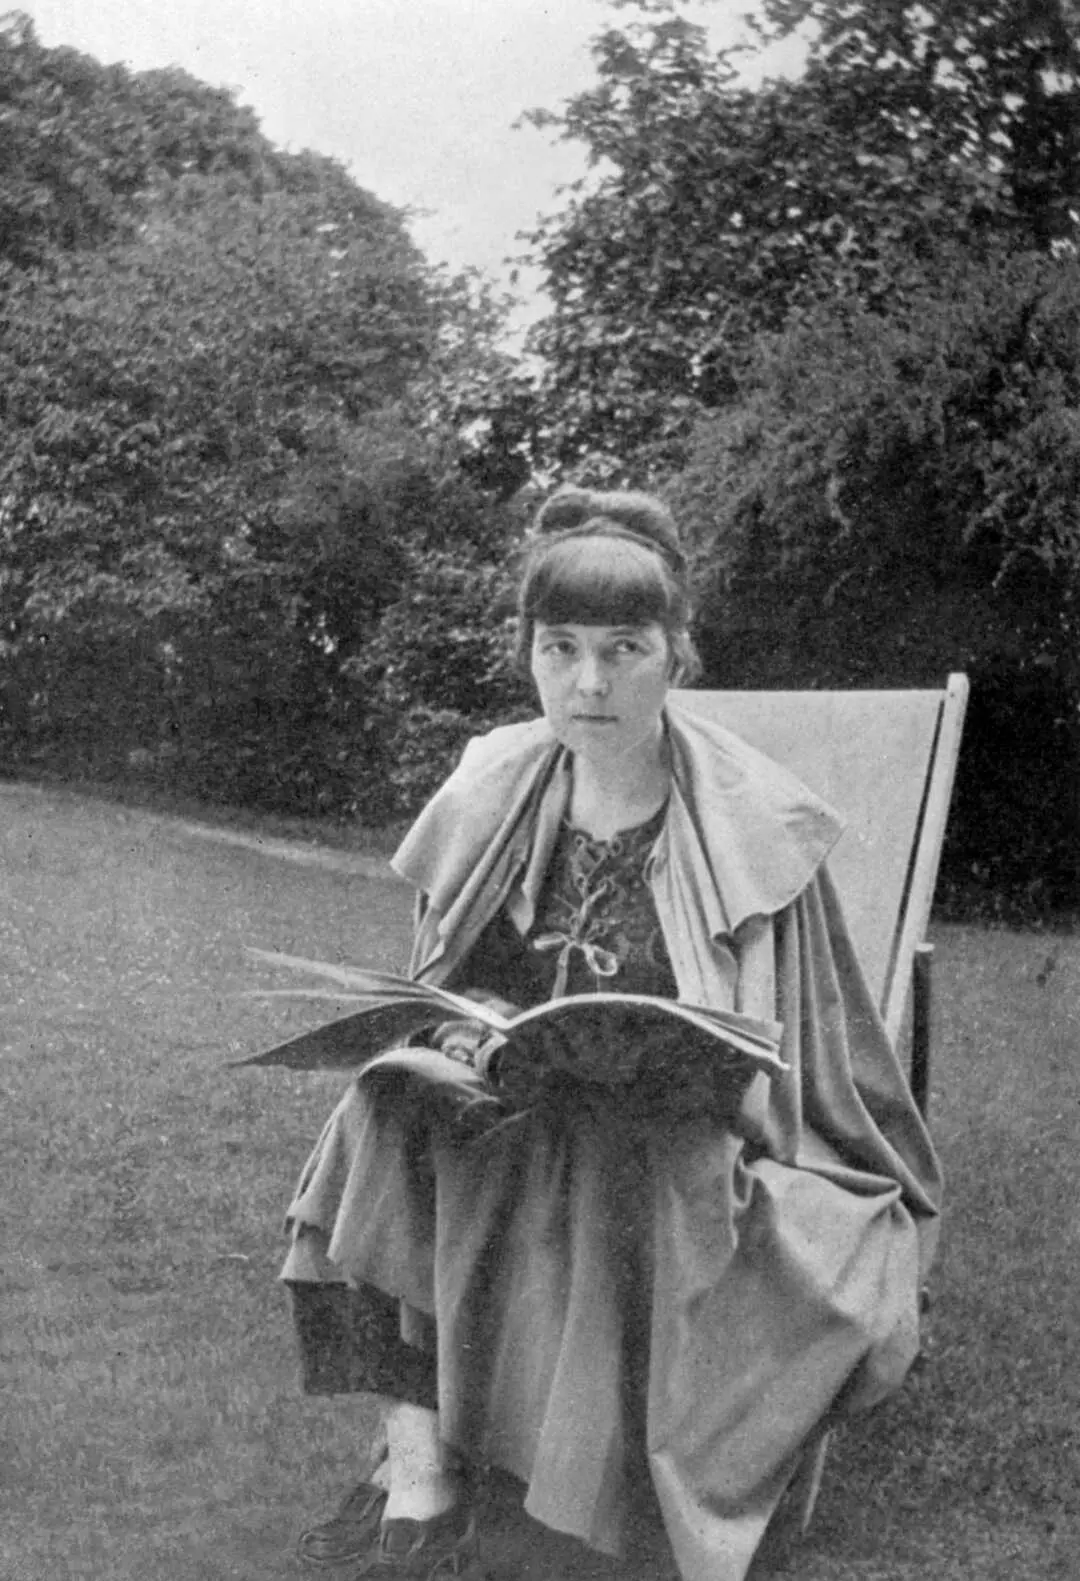 Katherine Mansfield sitting in a chair outdoors with a magazine or book in her lap